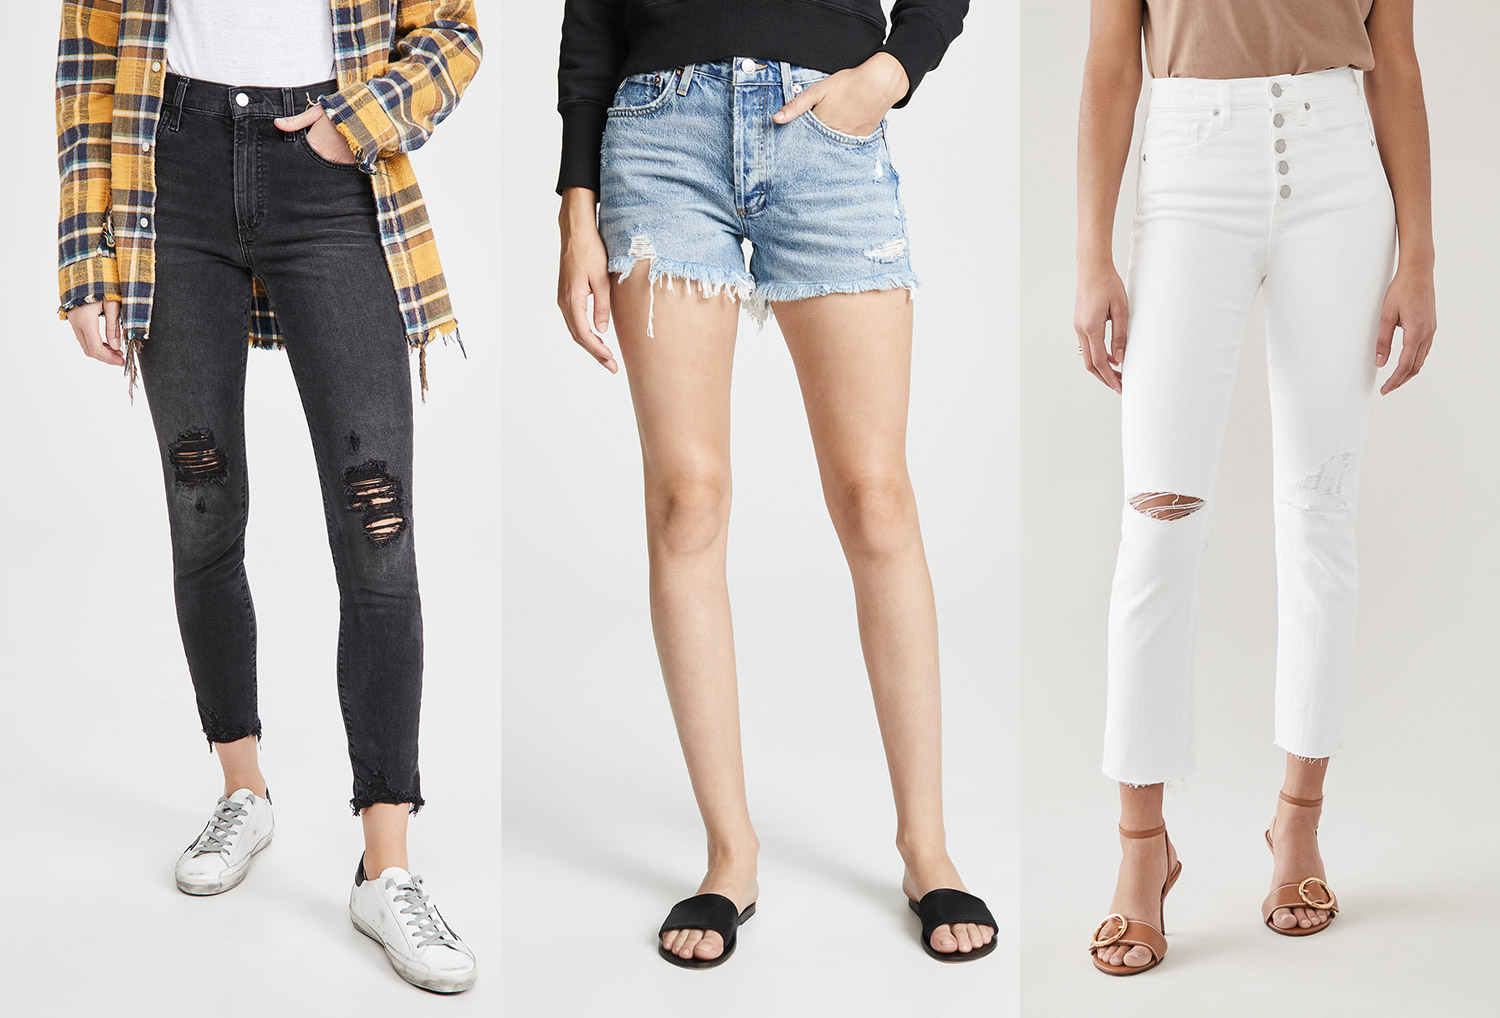 Shopbop 25% Off & New Denim Must Haves!